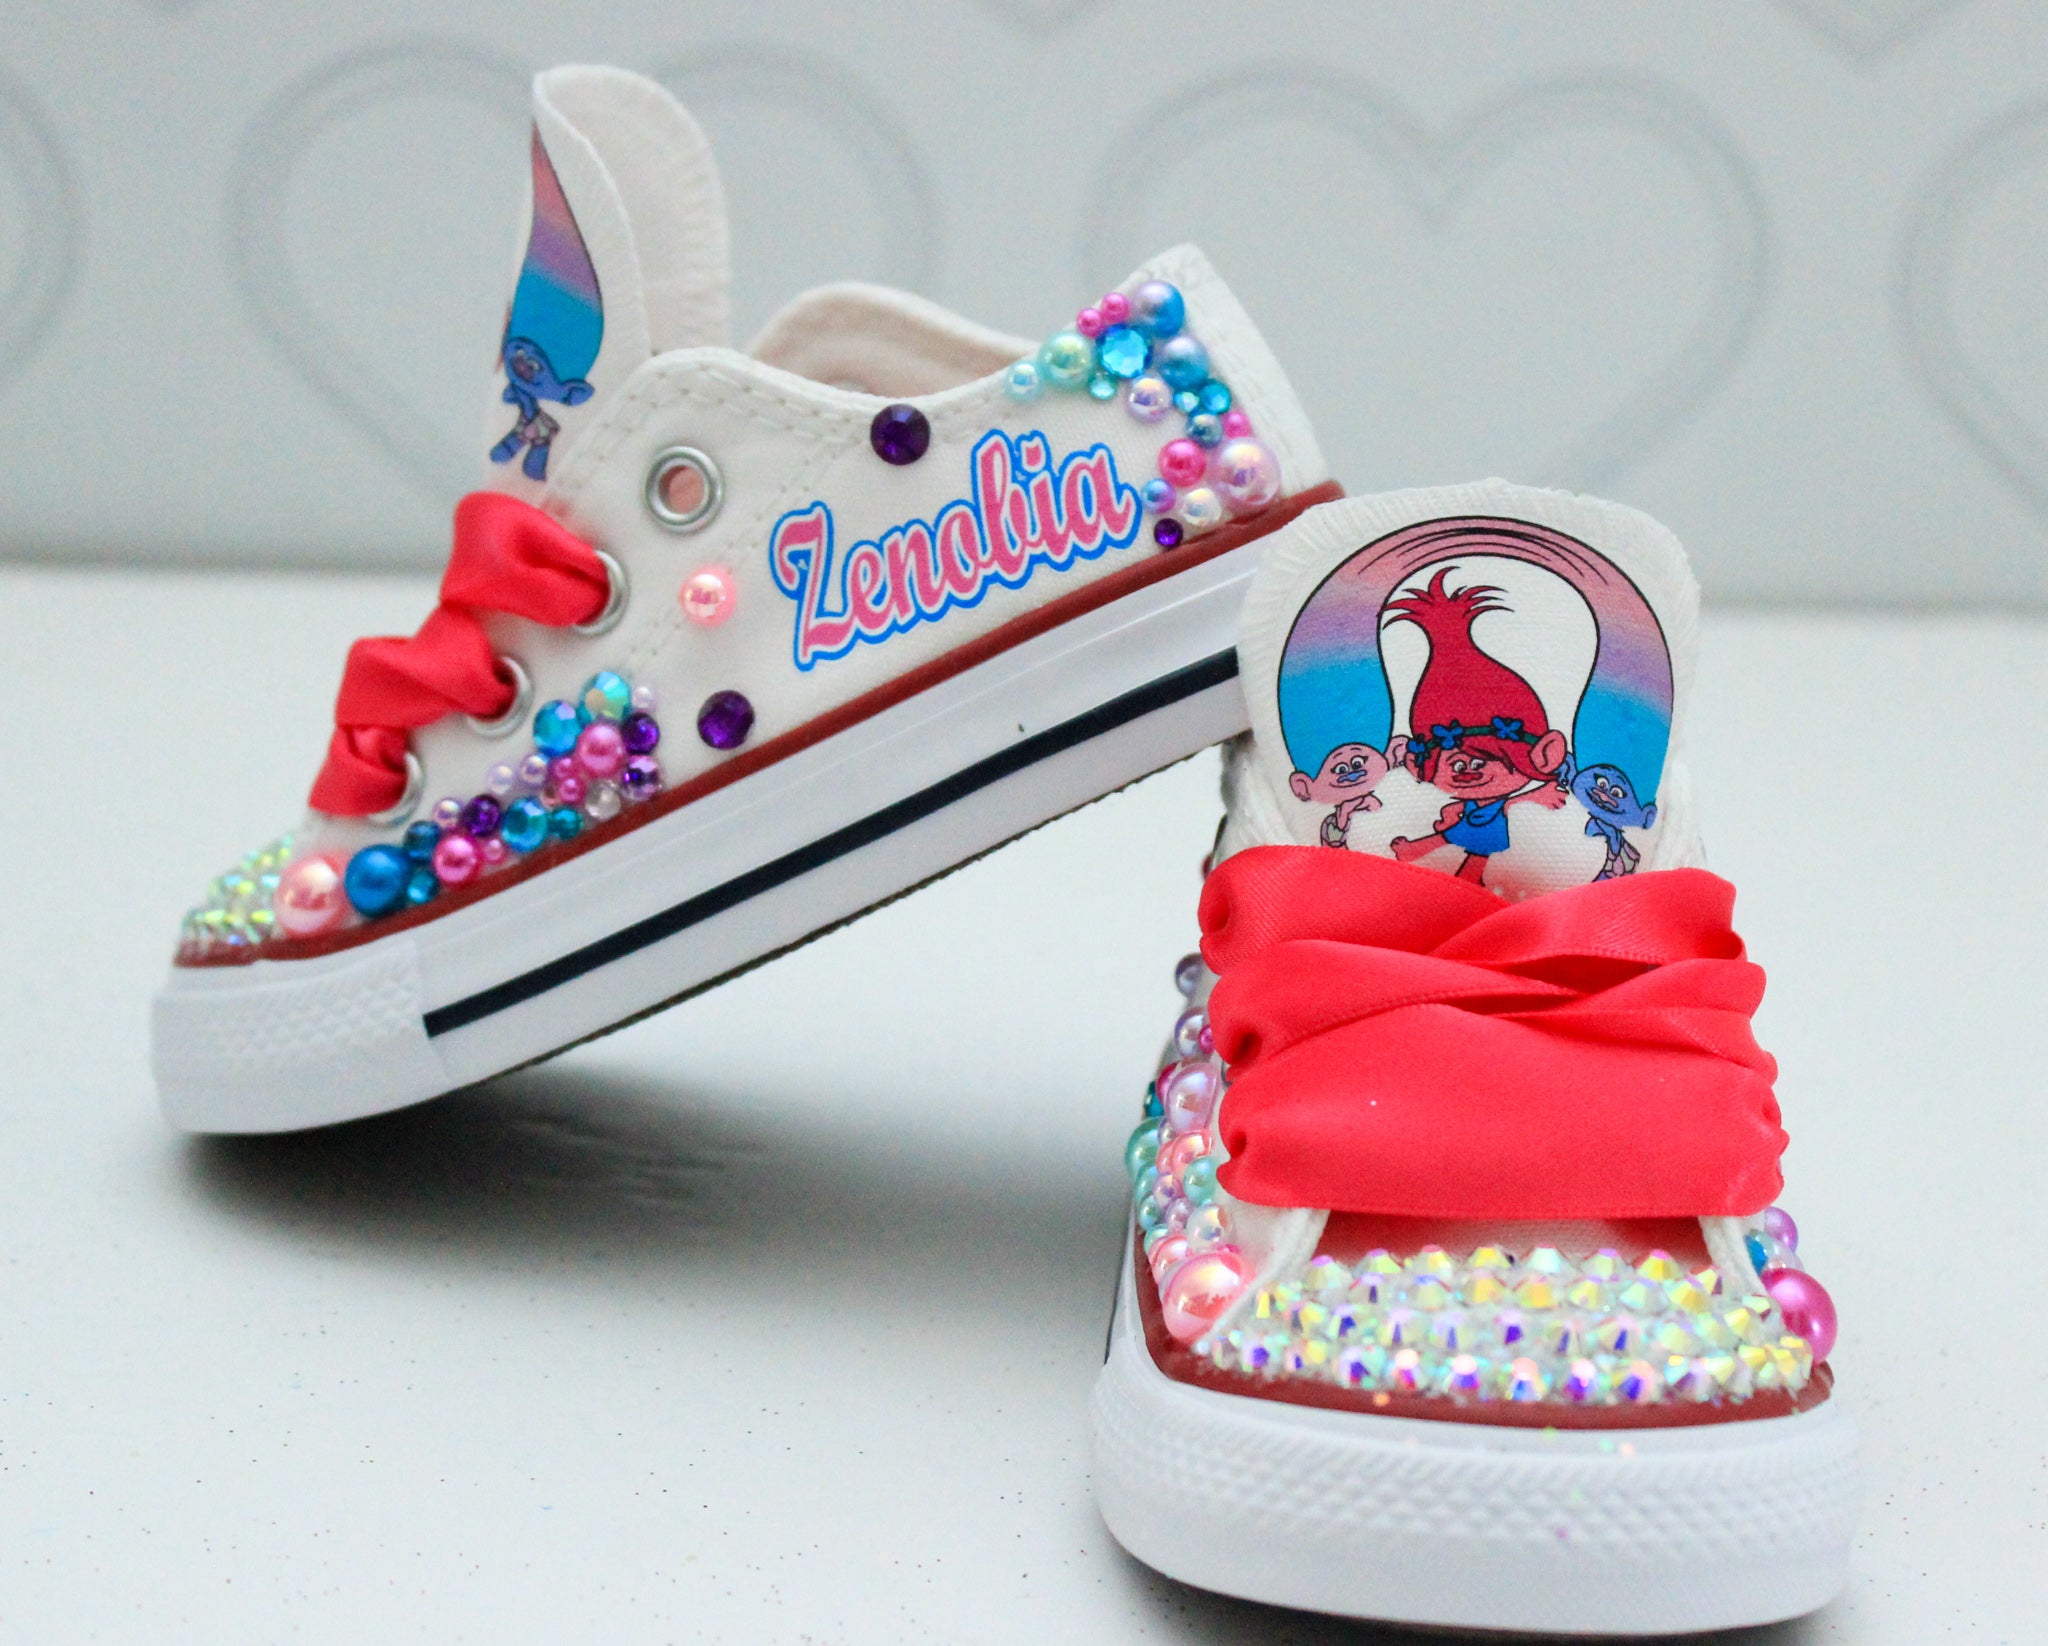 12 Character Shoes To Get Kids Into The 'Trolls' Spirit